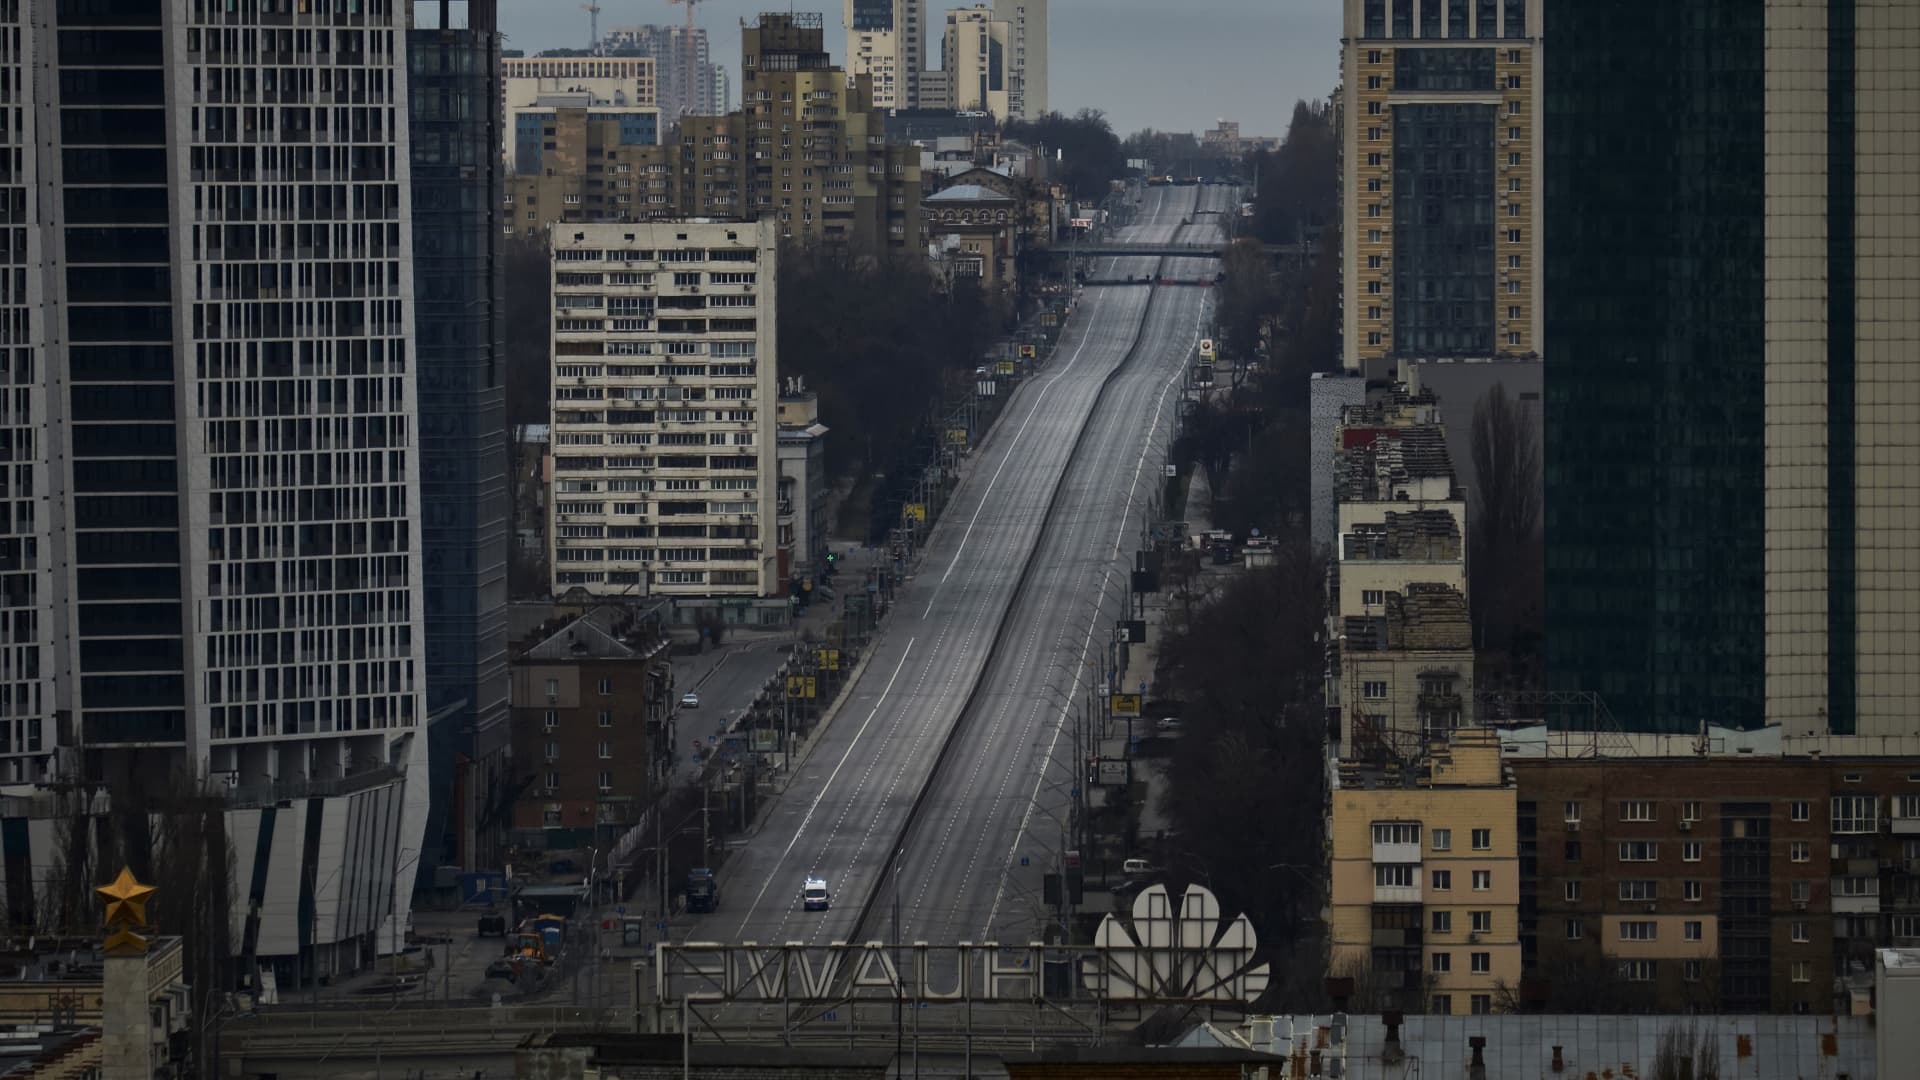 An ambulance drives along an empty street during a curfew imposed from Saturday 5pm to Monday 8am local time on February 27, 2022 in Kyiv, Ukraine.